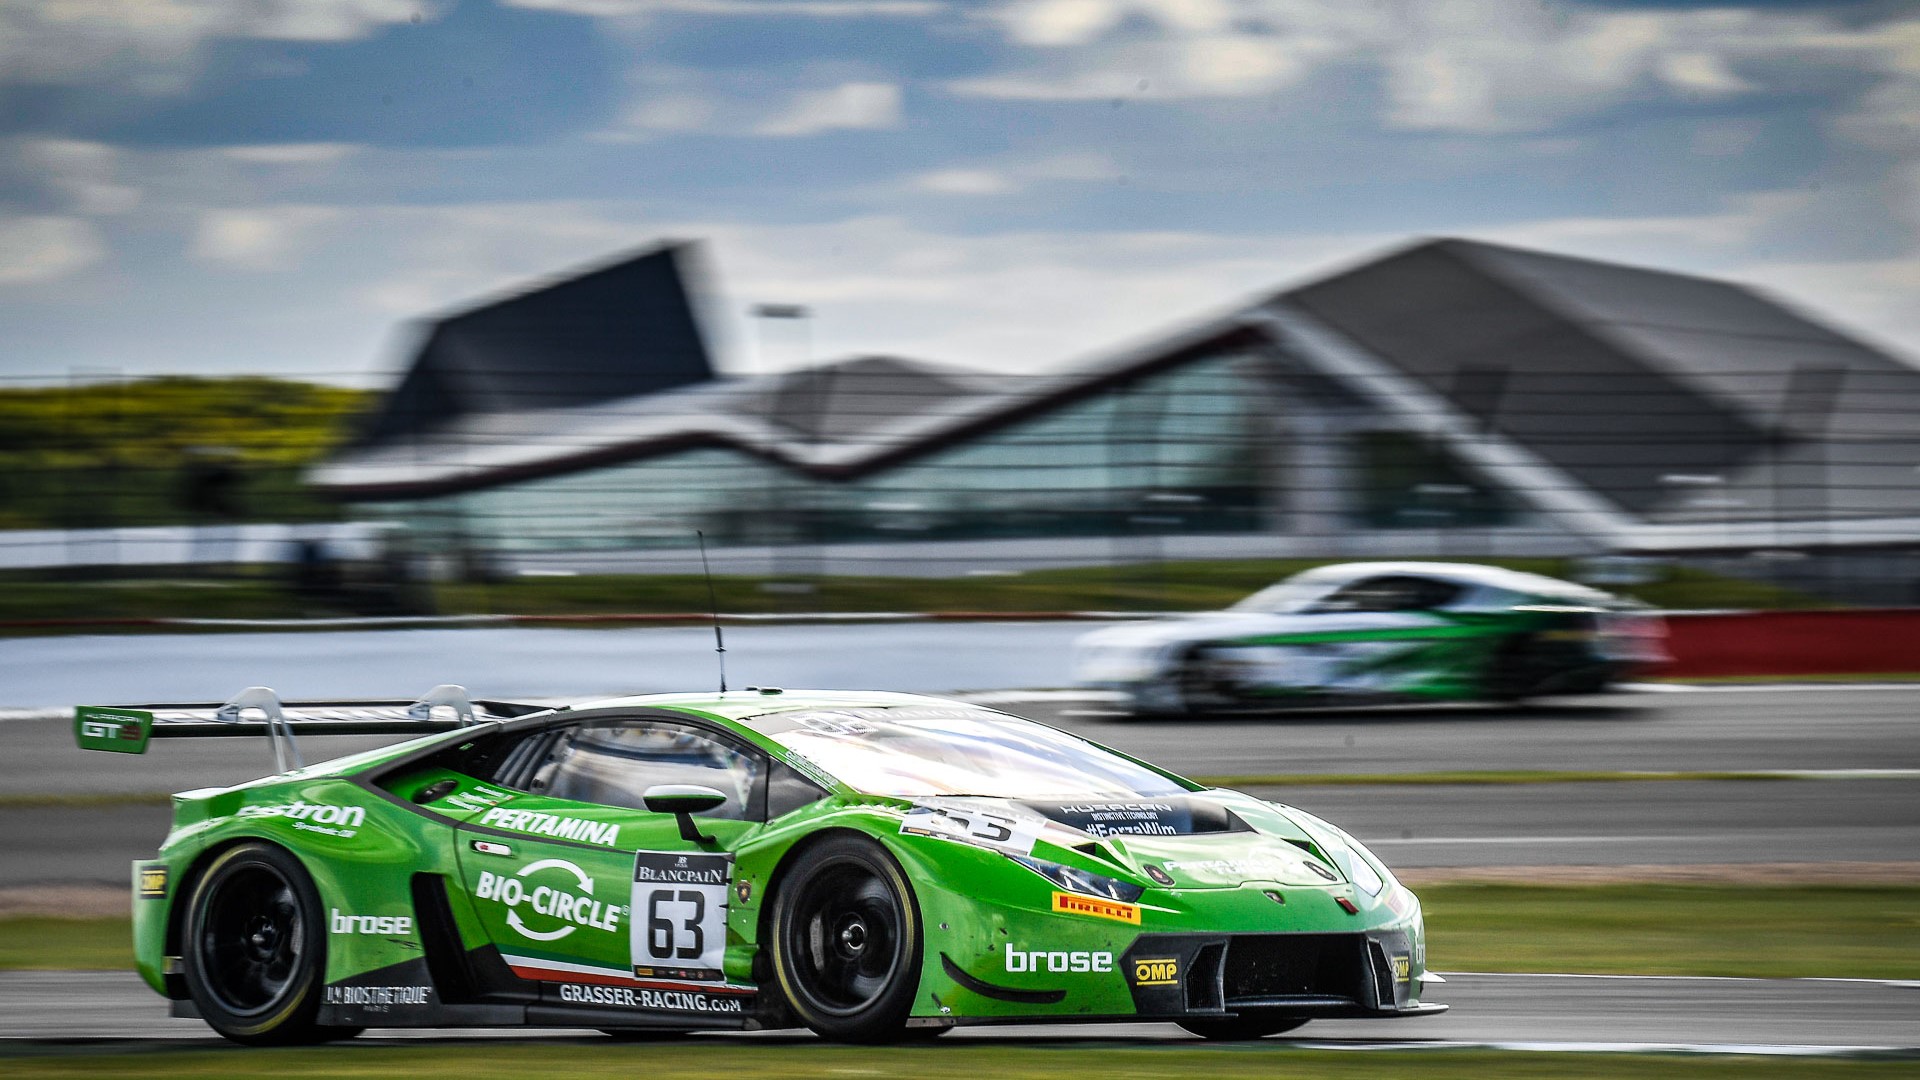 Three in a row for the Lamborghini Huracán GT3 in the Blancpain GT Series